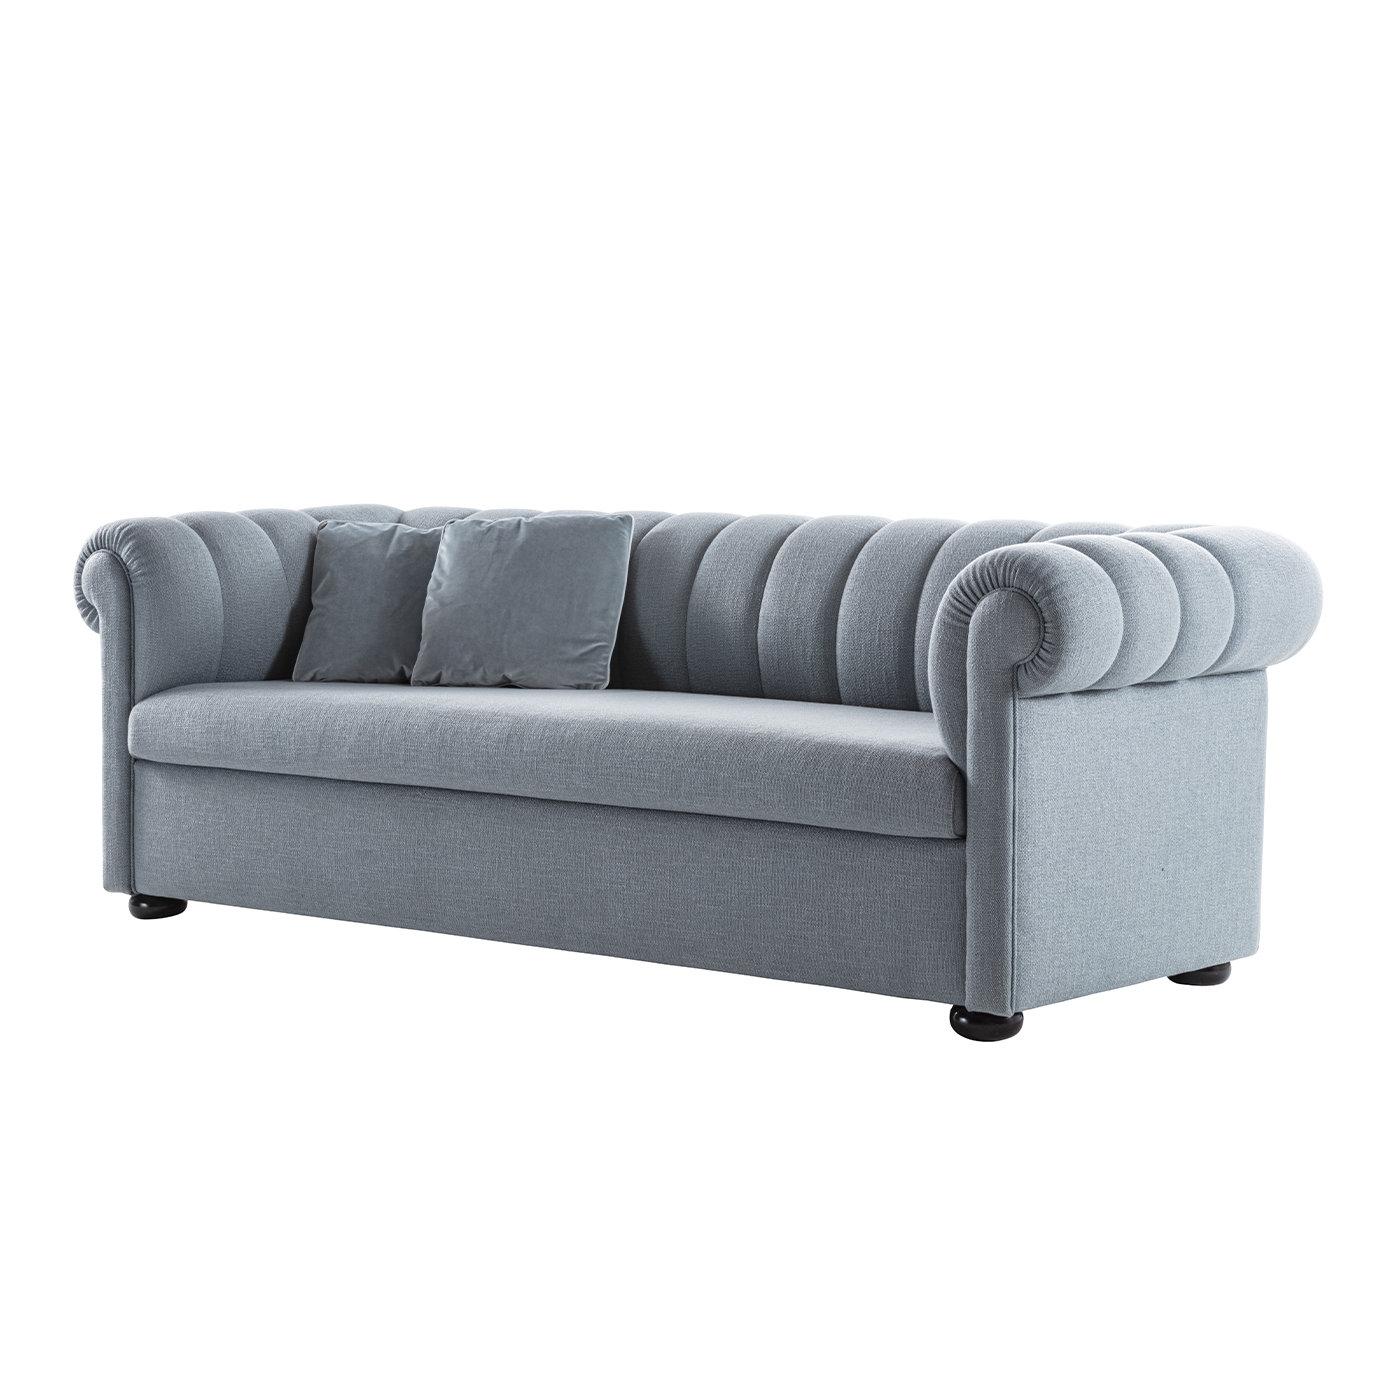 This sofa bed exemplifies its personal interpretation key of classic furniture. The solid walnut frame is generously padded with multi-density polyurethane foam and upholstered in soft gray fabric, the backrest enlivened by an exquisite quilted